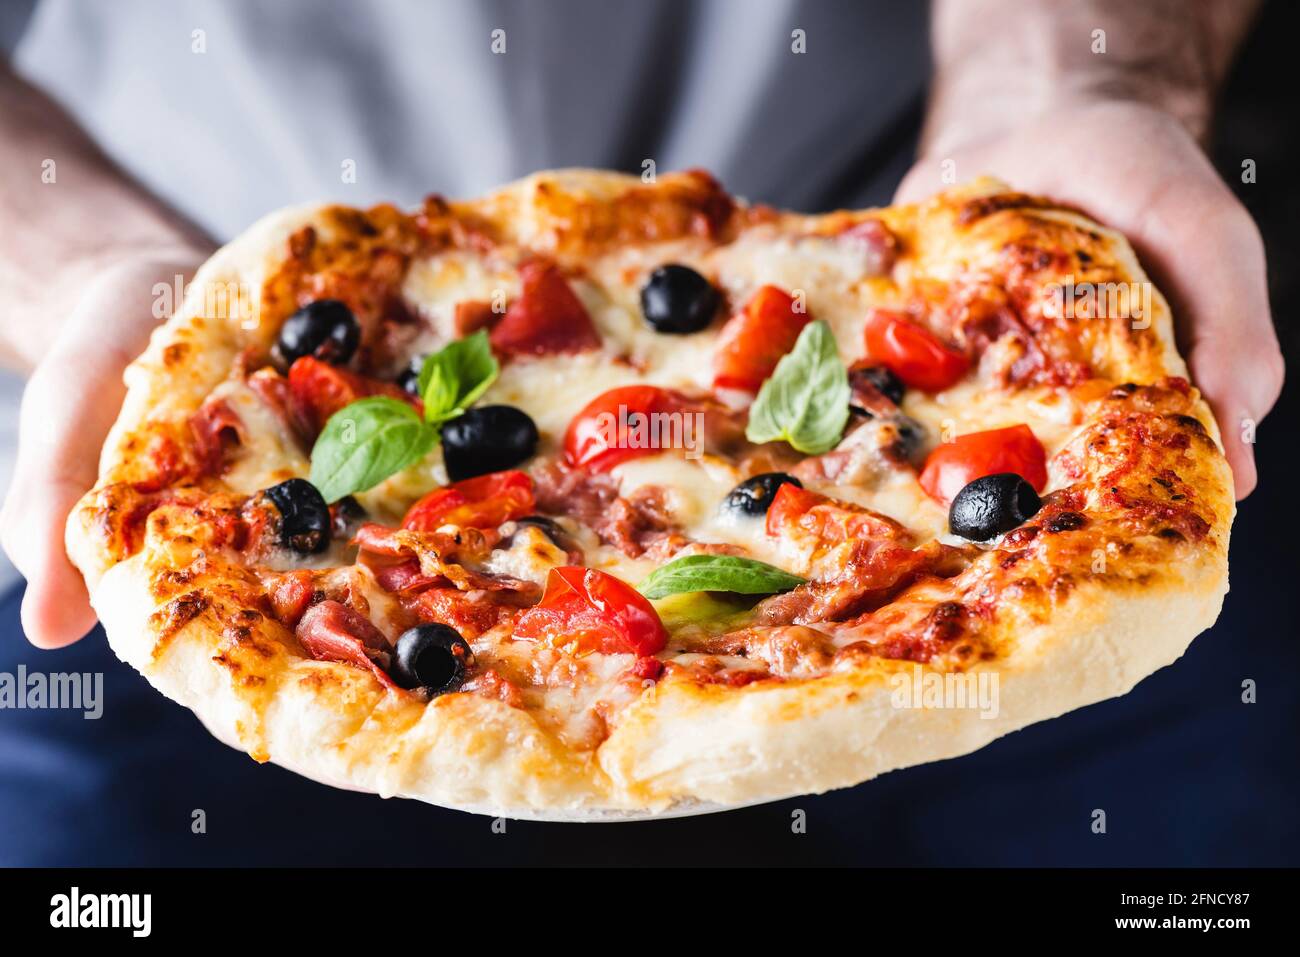 Male hands holding a pizza. Baked hot italian pizza with ham, black olives and tomatoes in hands Stock Photo